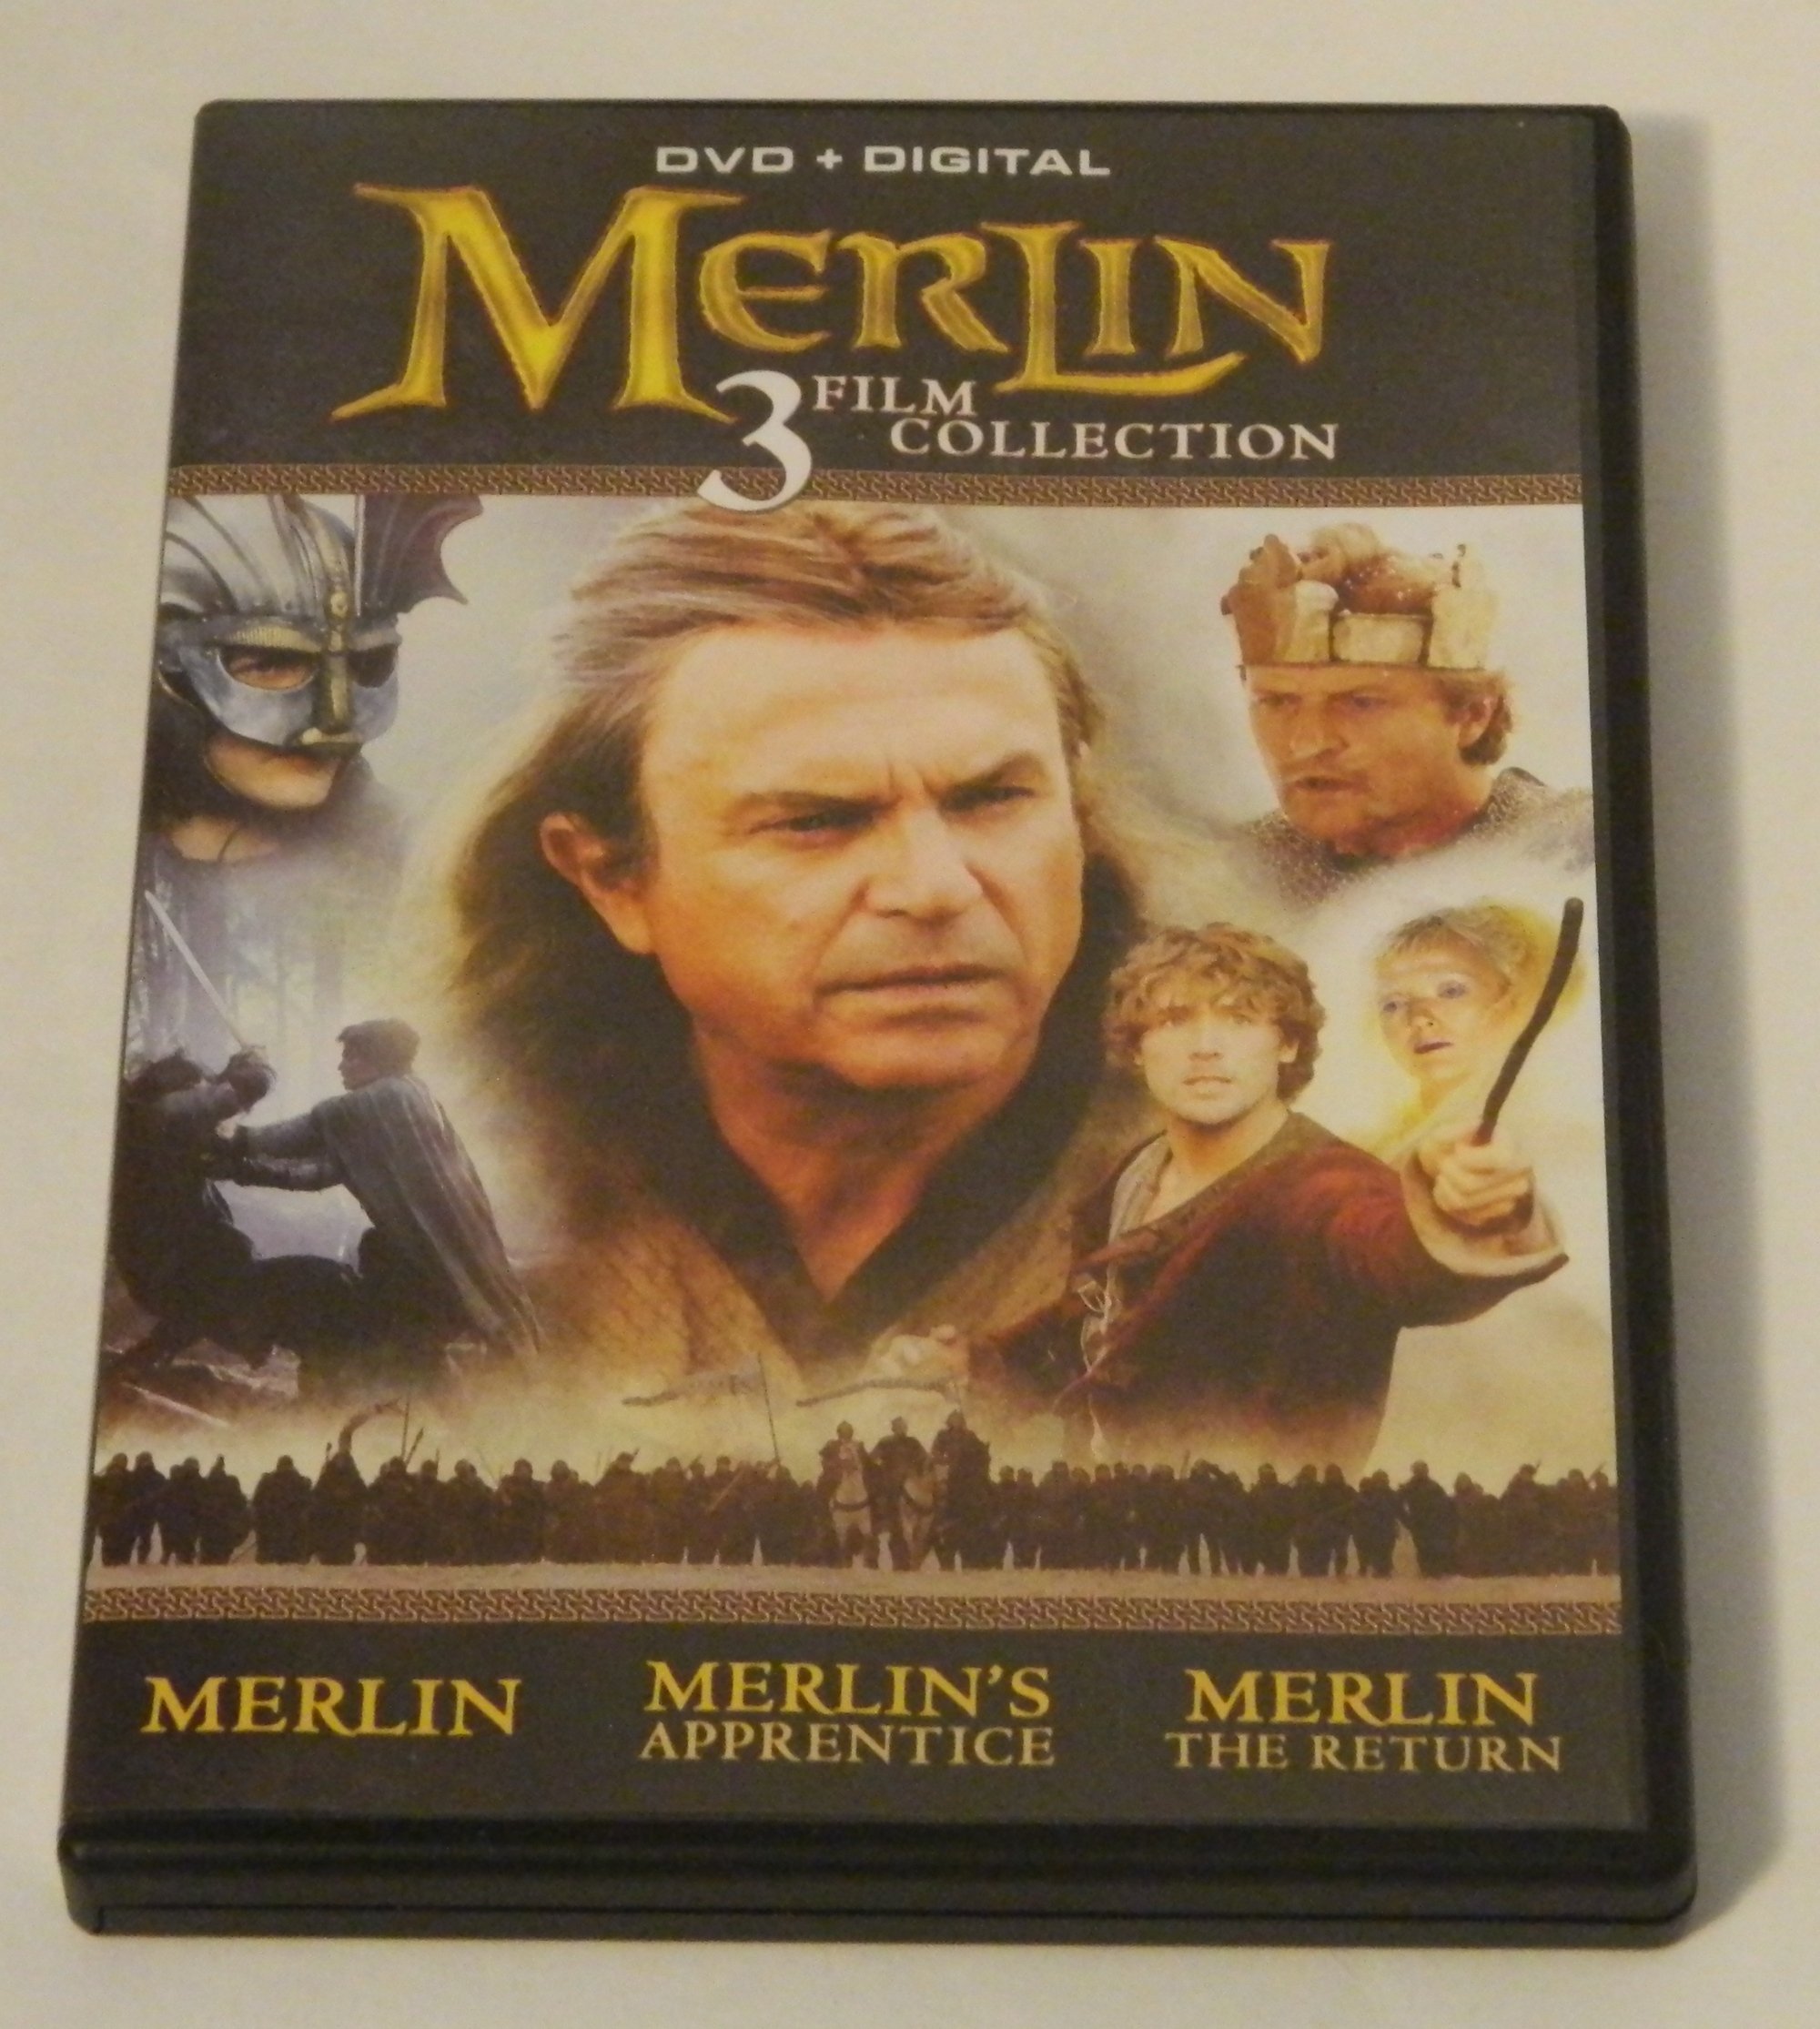 Merlin 3 Film Collection DVD Review